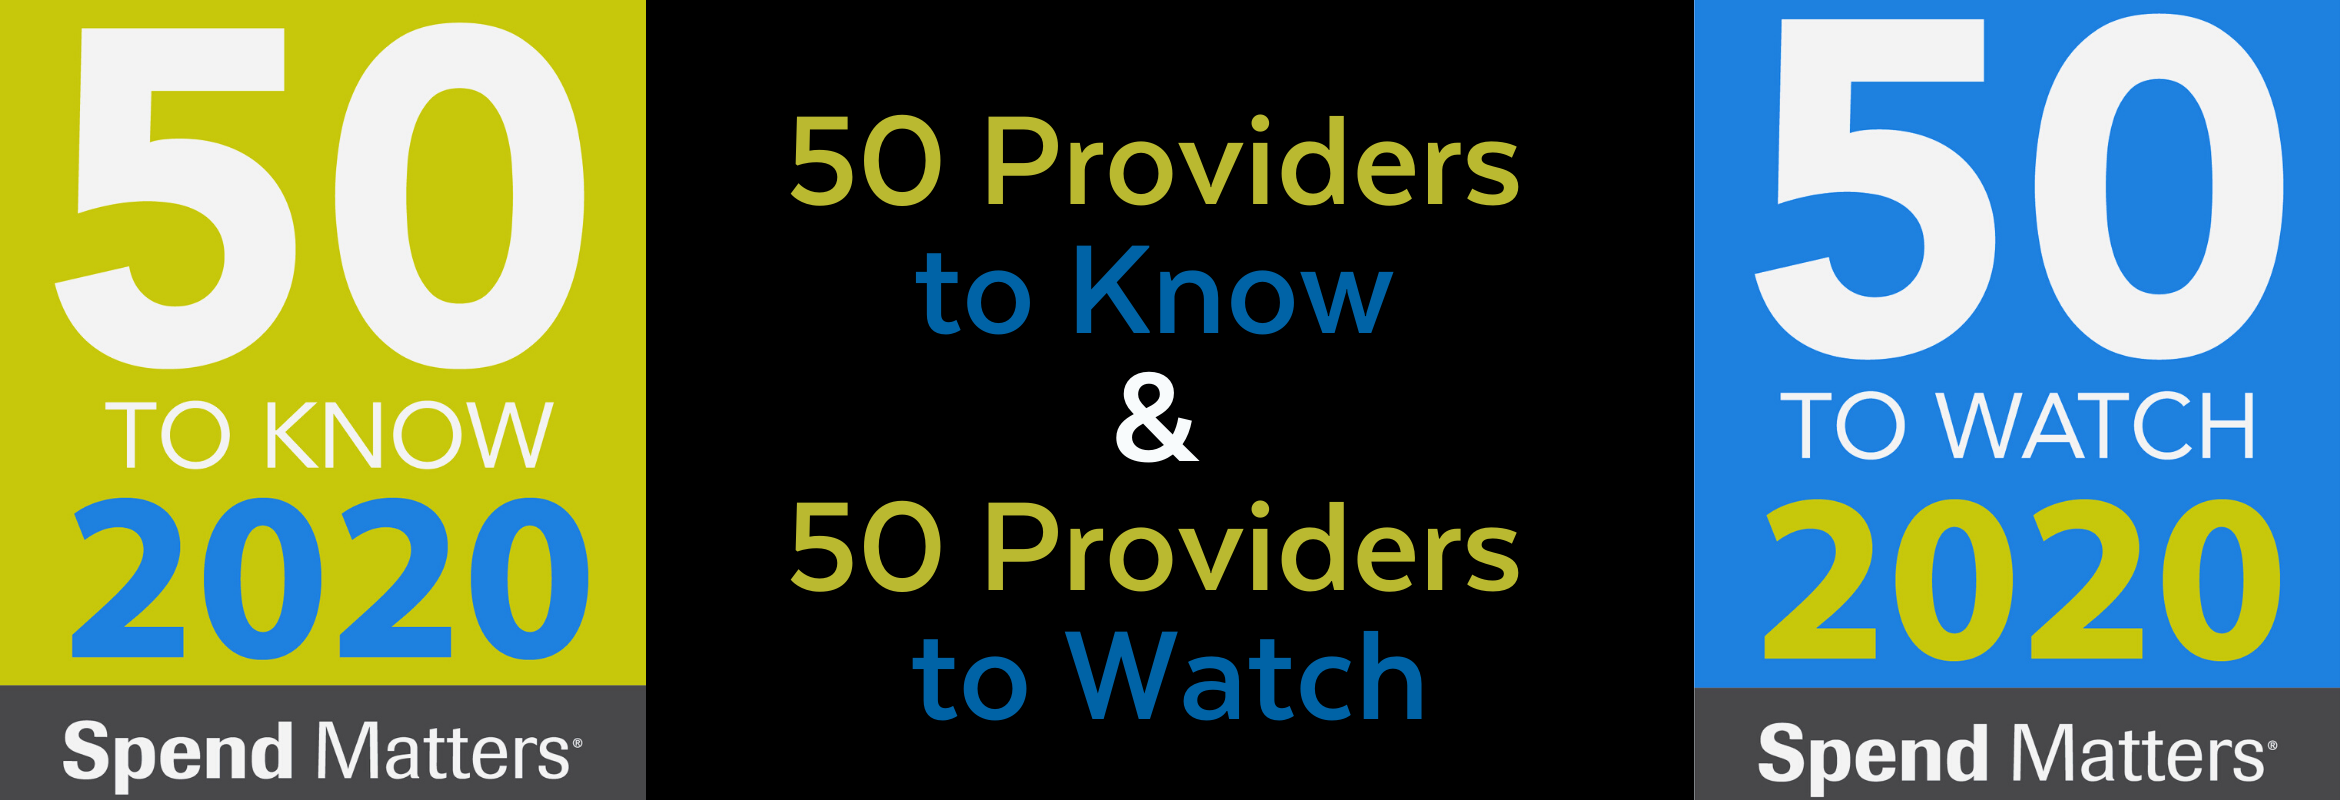 50 providers to know, 50 providers to watch